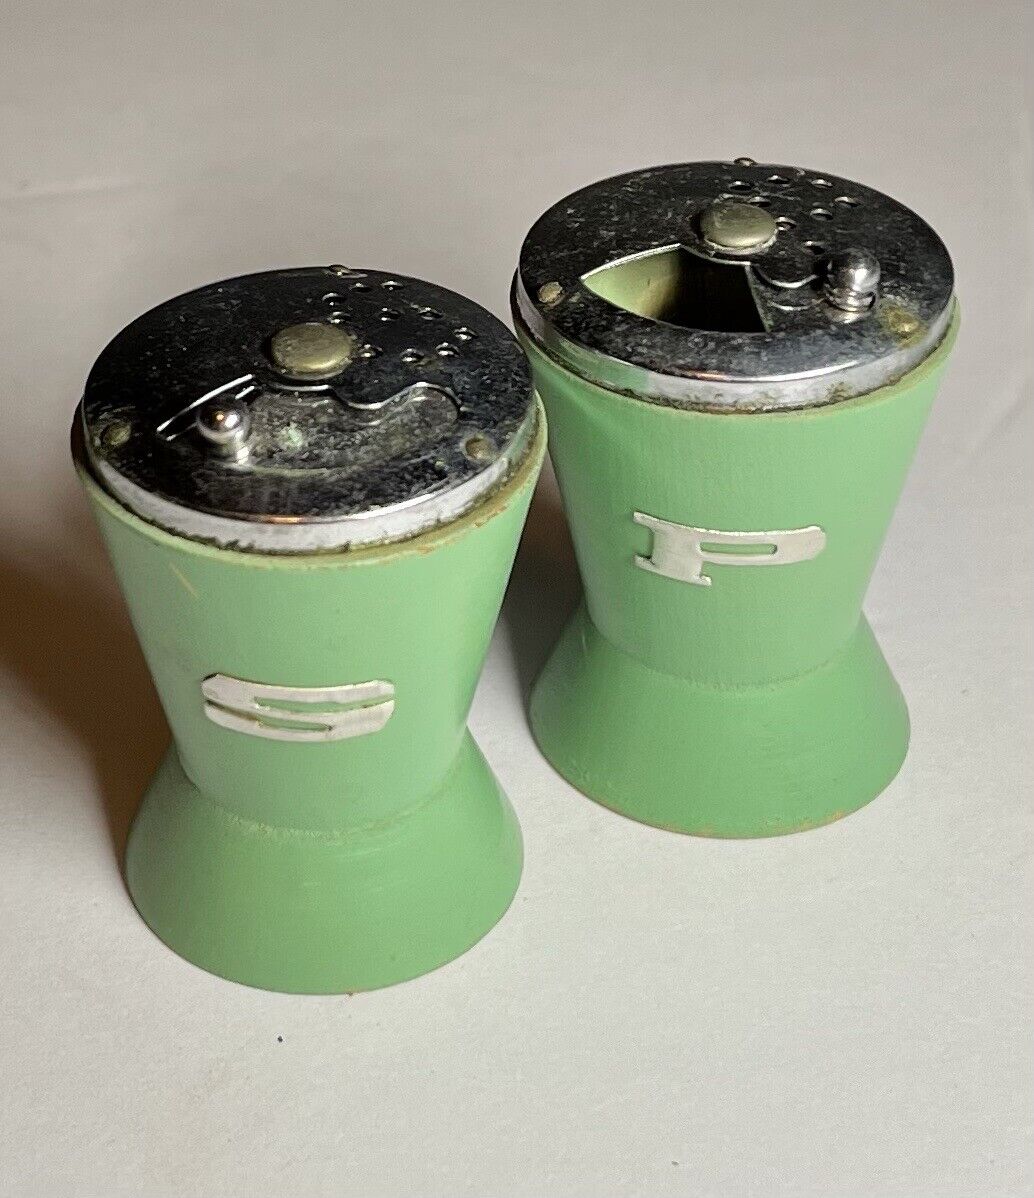 1950’s Diner Salt & Pepper Shakers Small Iconic Design Font & Color Shake & Pour